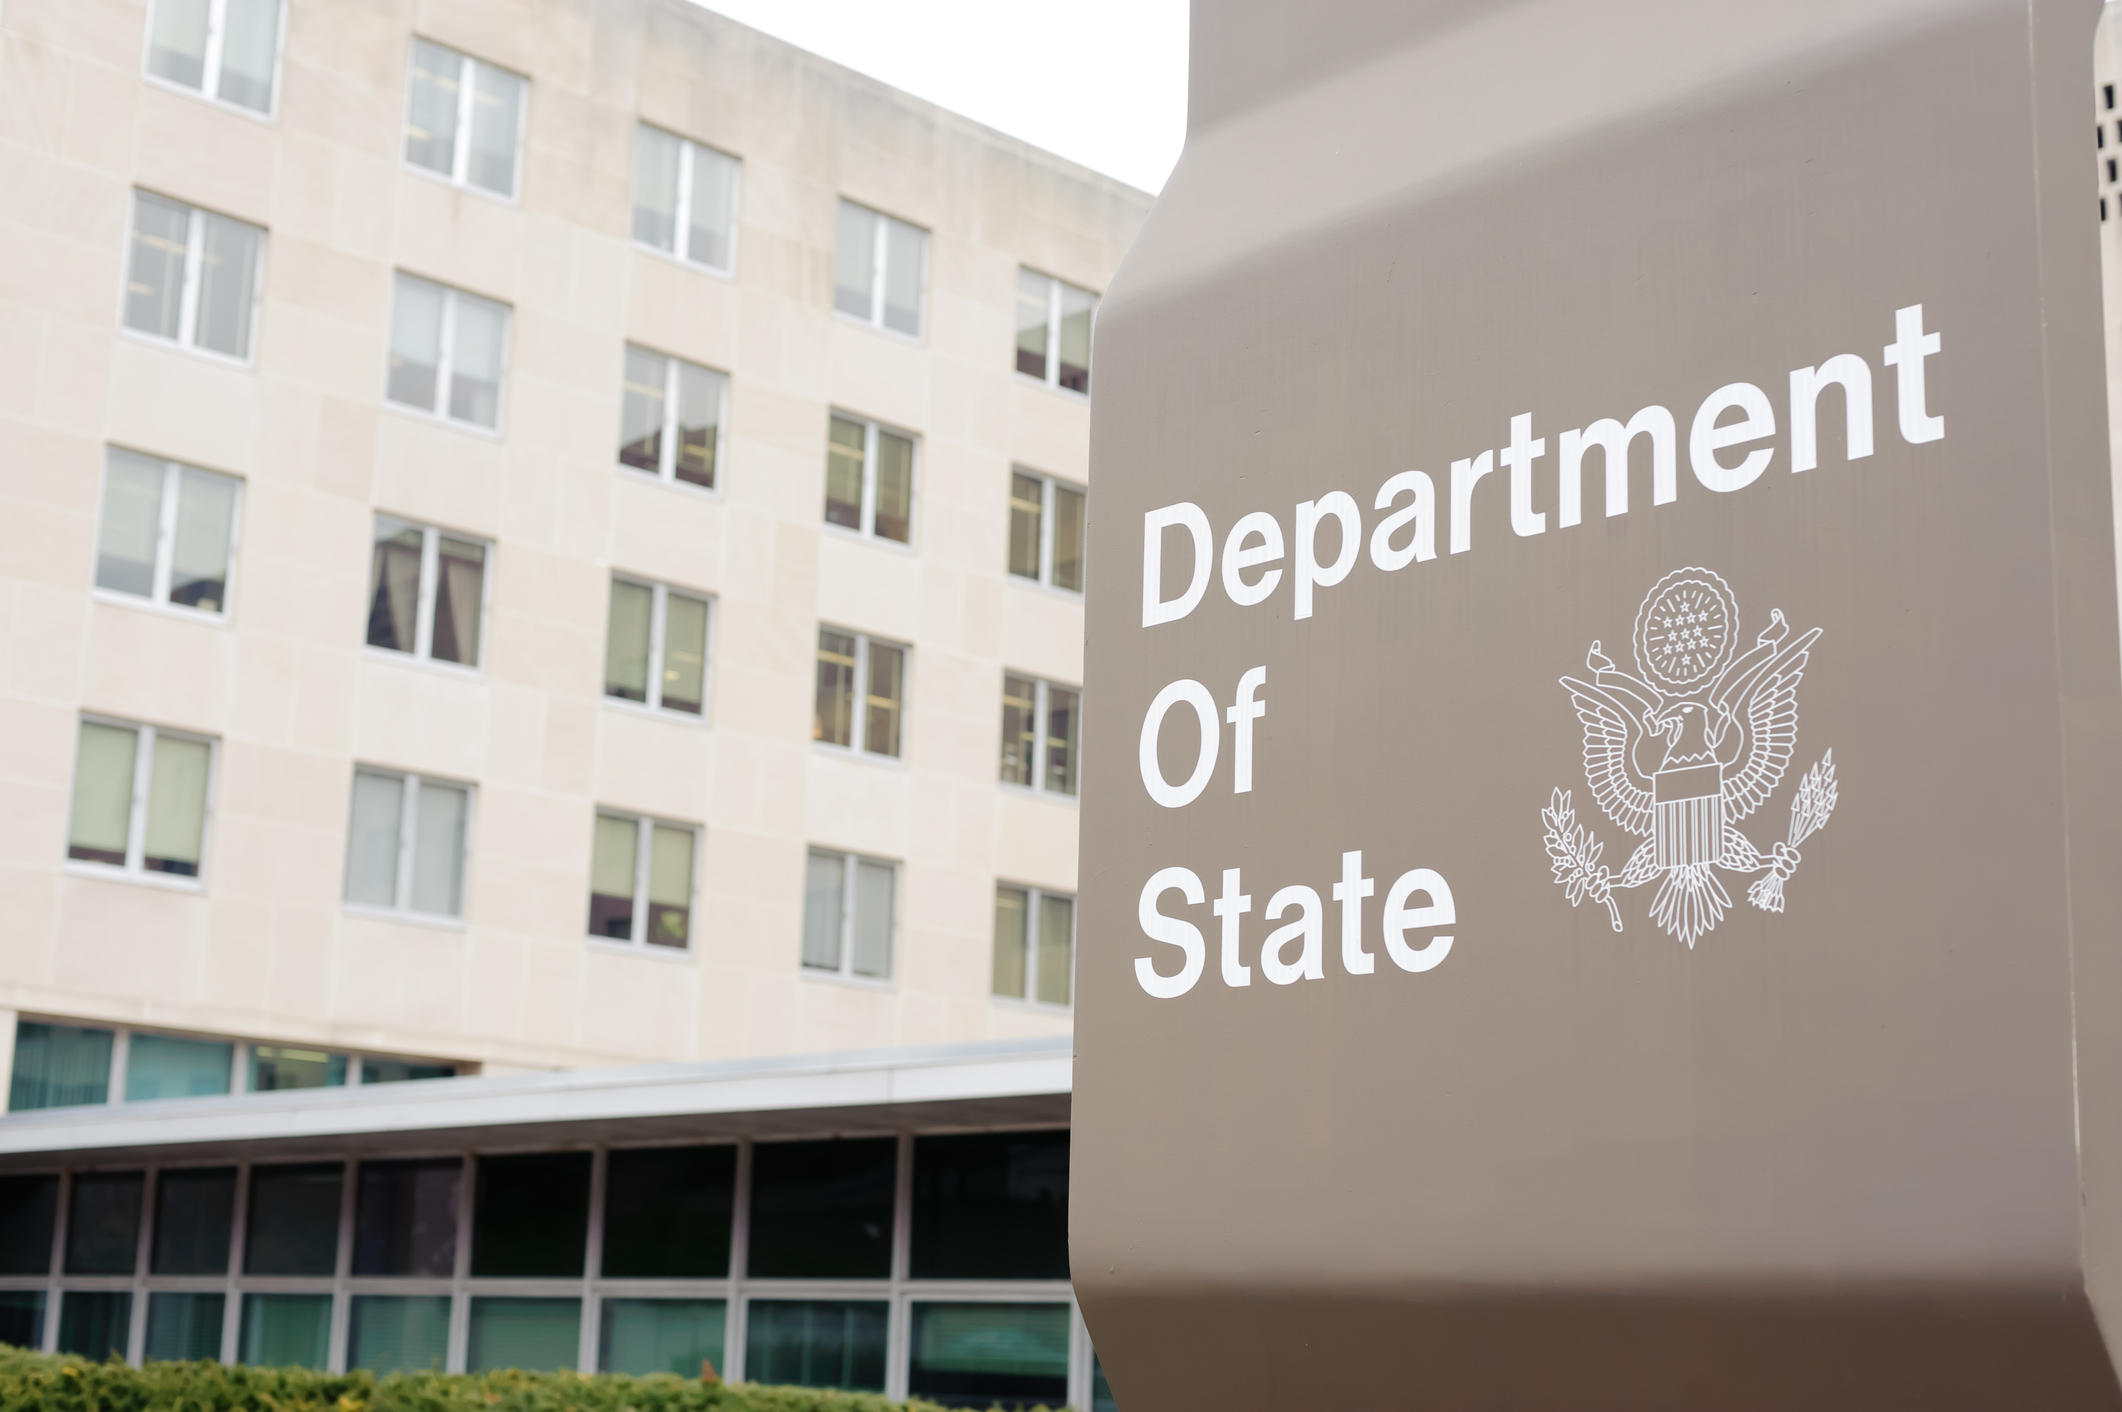 US State Department report on Romania points to widespread corruption and misuse of public funds